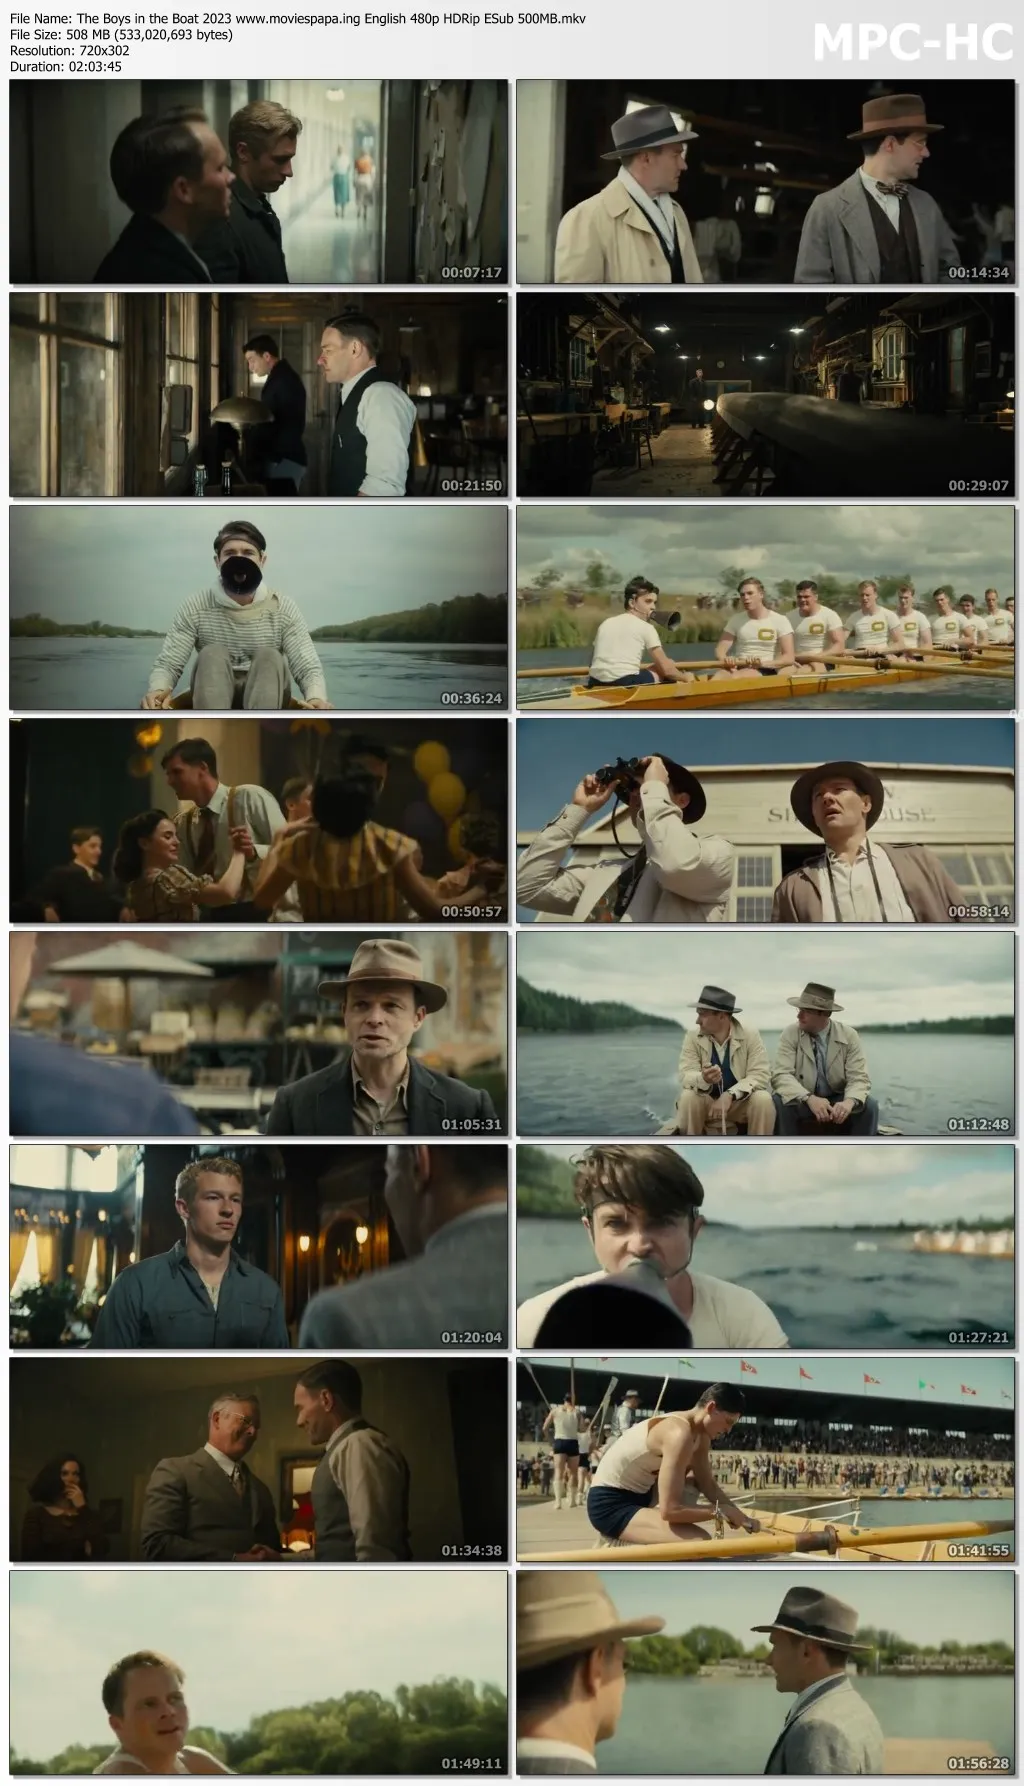  The Boys in the Boat 2023 English 1080p HDRip ESub 1.4GB Download